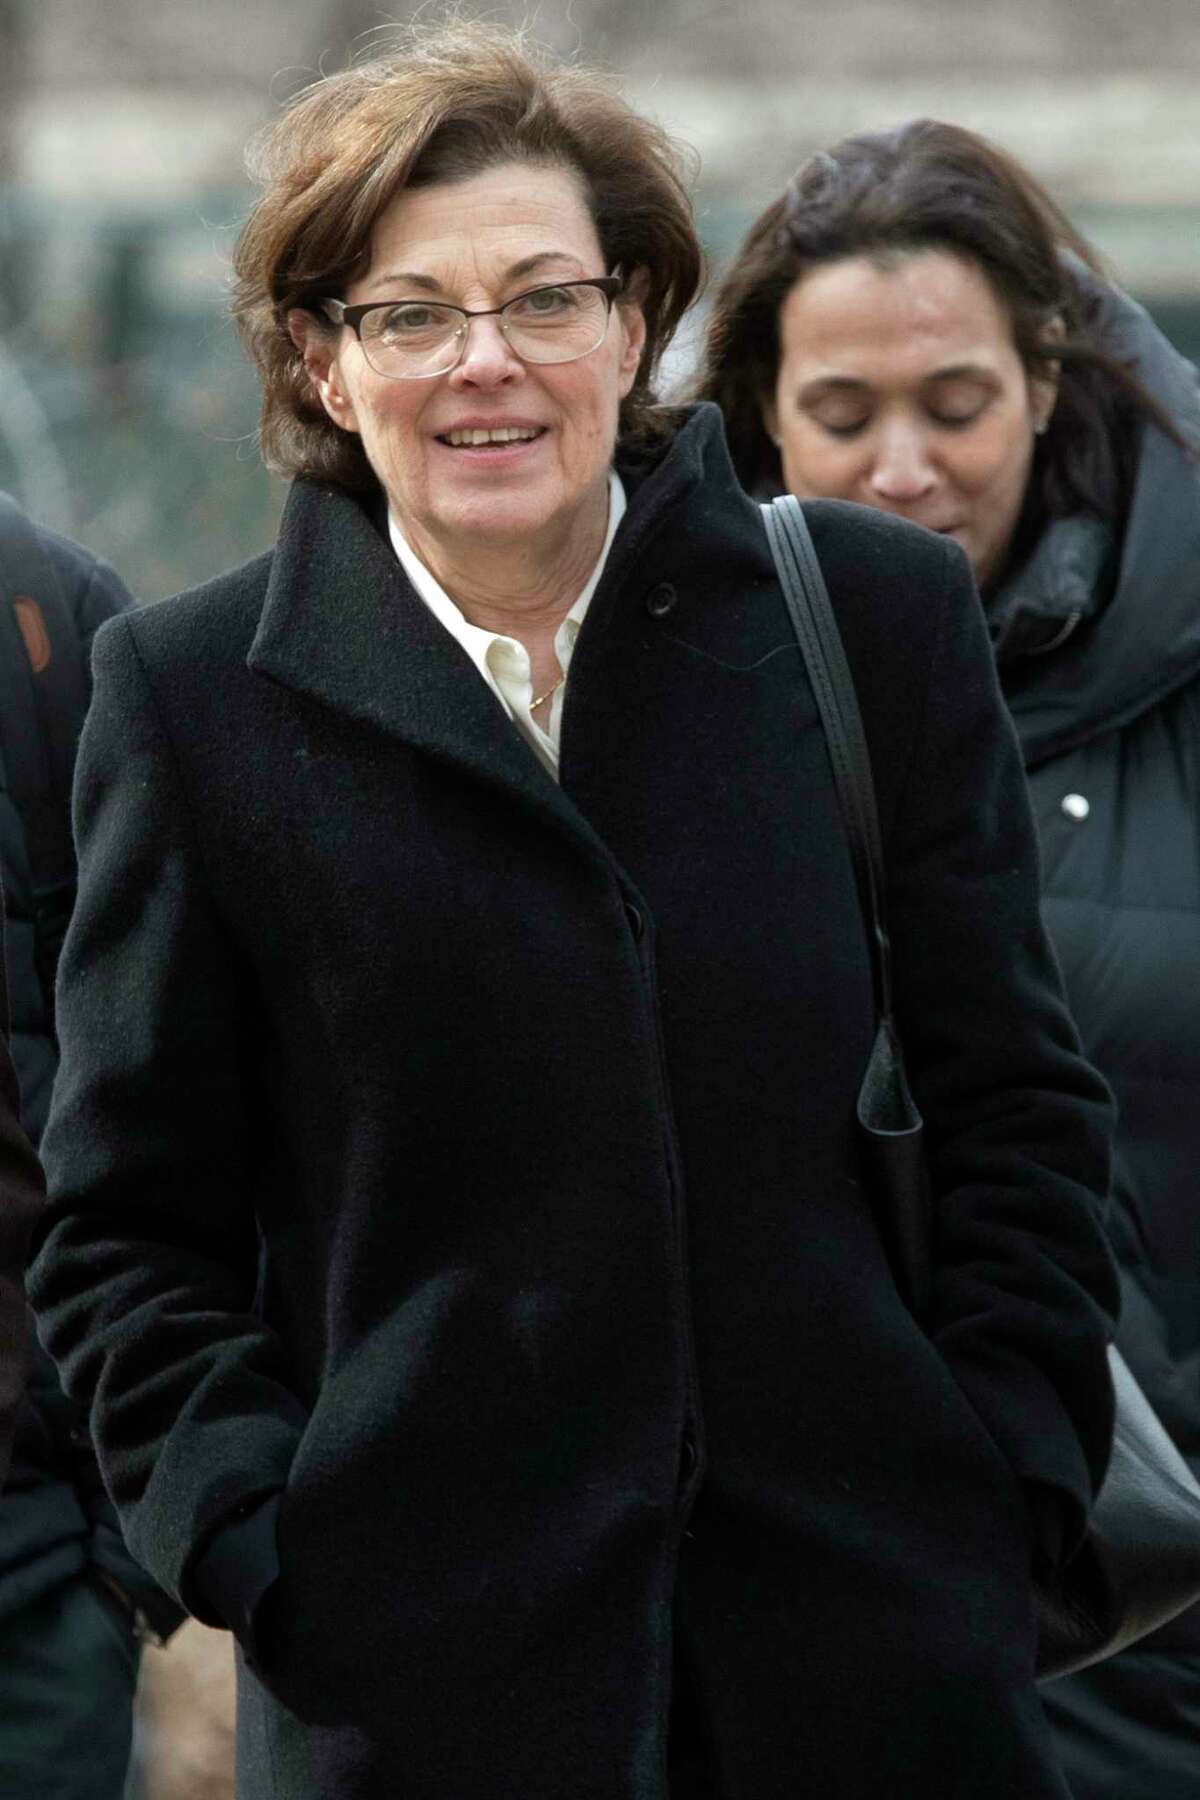 A federal judge has scheduled the sentencing of former NXIVM president Nancy Salzman for Aug. 2, while rejecting her bail modification request to be with her daughter for the birth of her first grandchild.